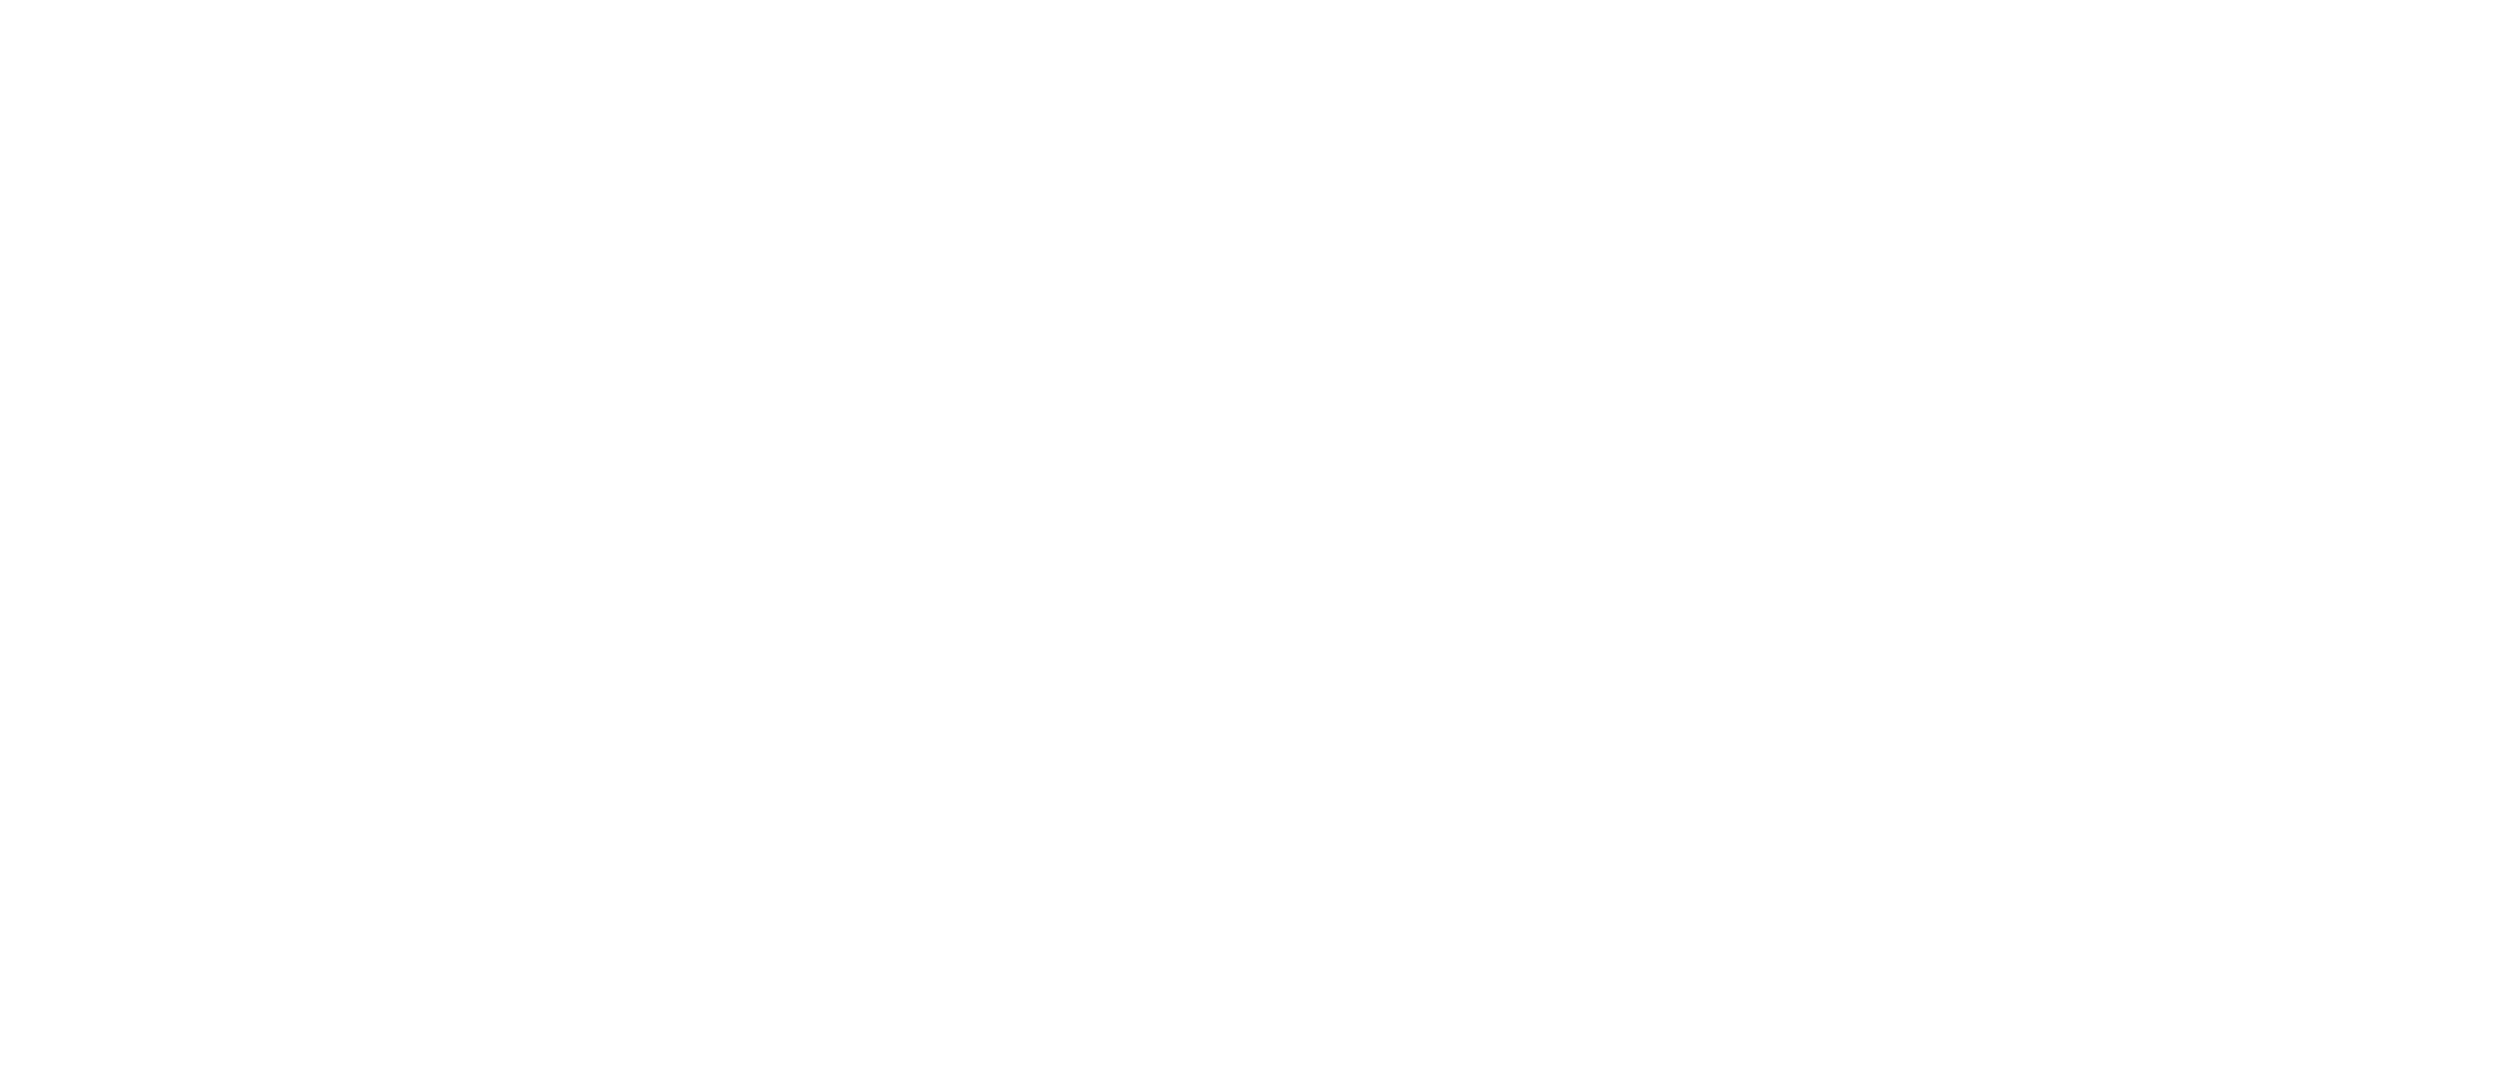 New Orleans Equity Partners